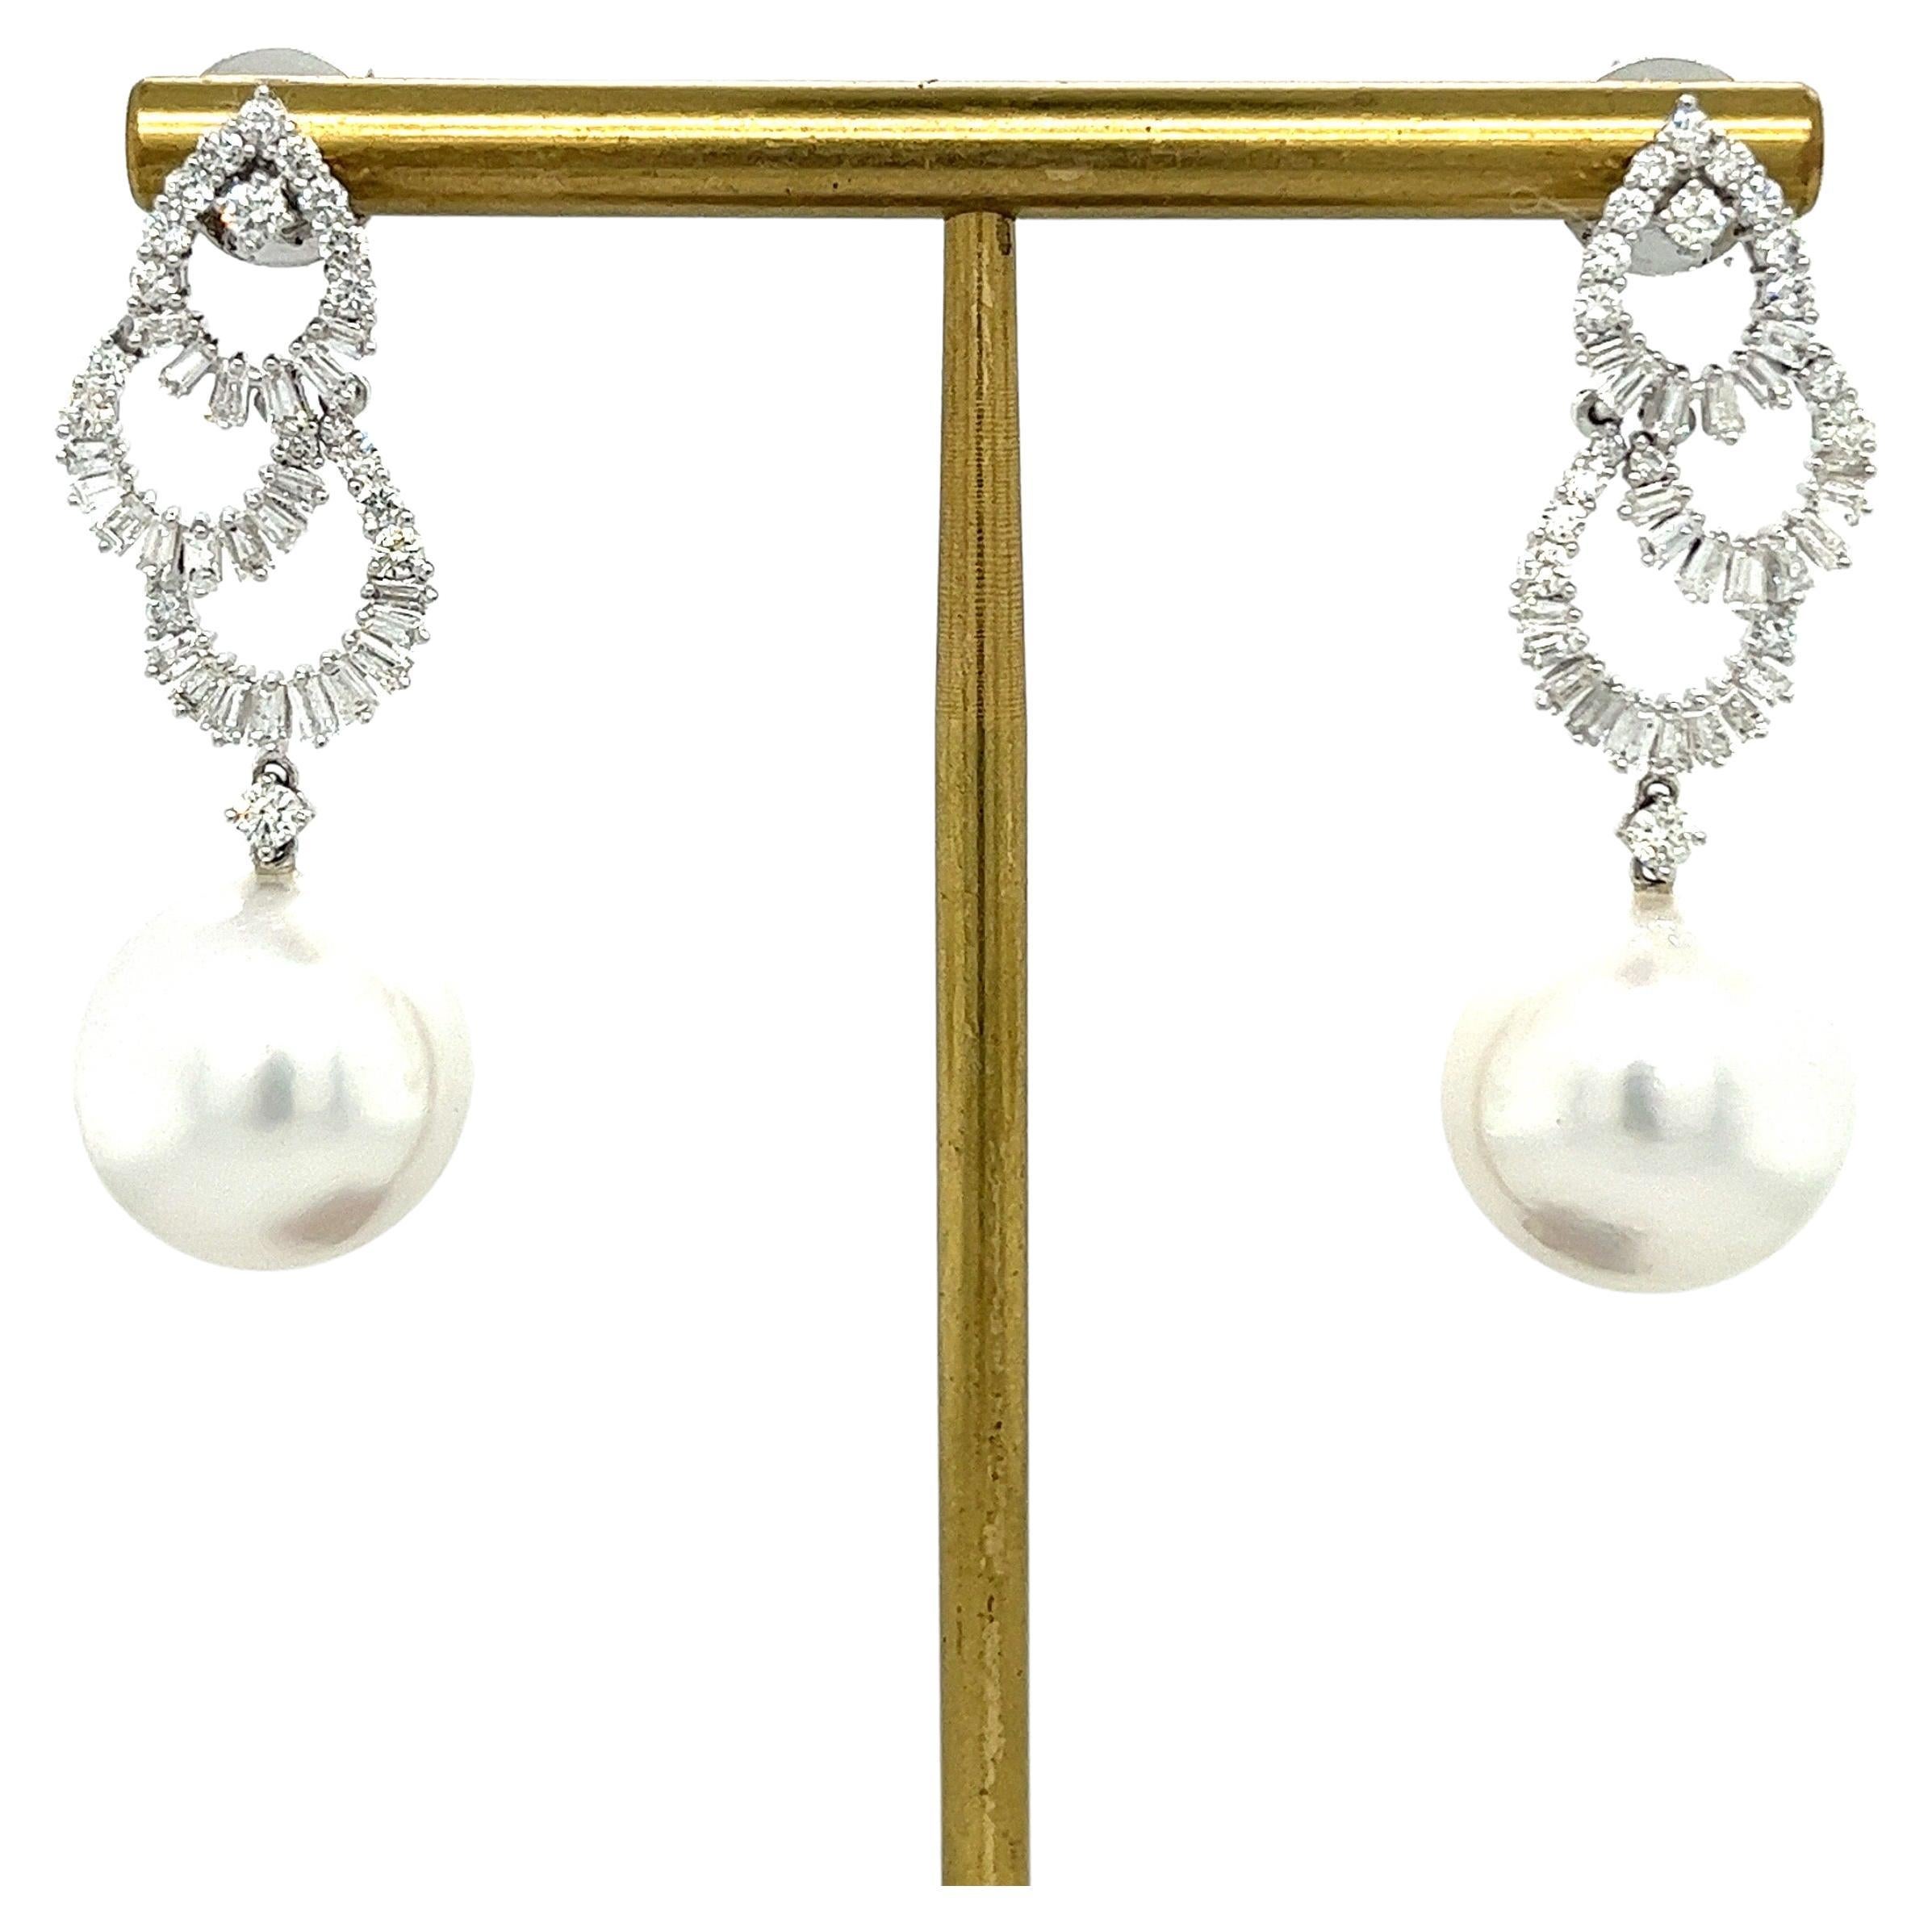 18K White Gold Pearl Earrings with Diamonds

2 White Pearls 14-15 mm
84 Diamonds - 1.89 CT
18K White Gold 5.61 GM

Althoff Jewelry exquisite 18K white gold earrings are adorned with two lustrous white pearls, each measuring 14-15 mm in diameter. The